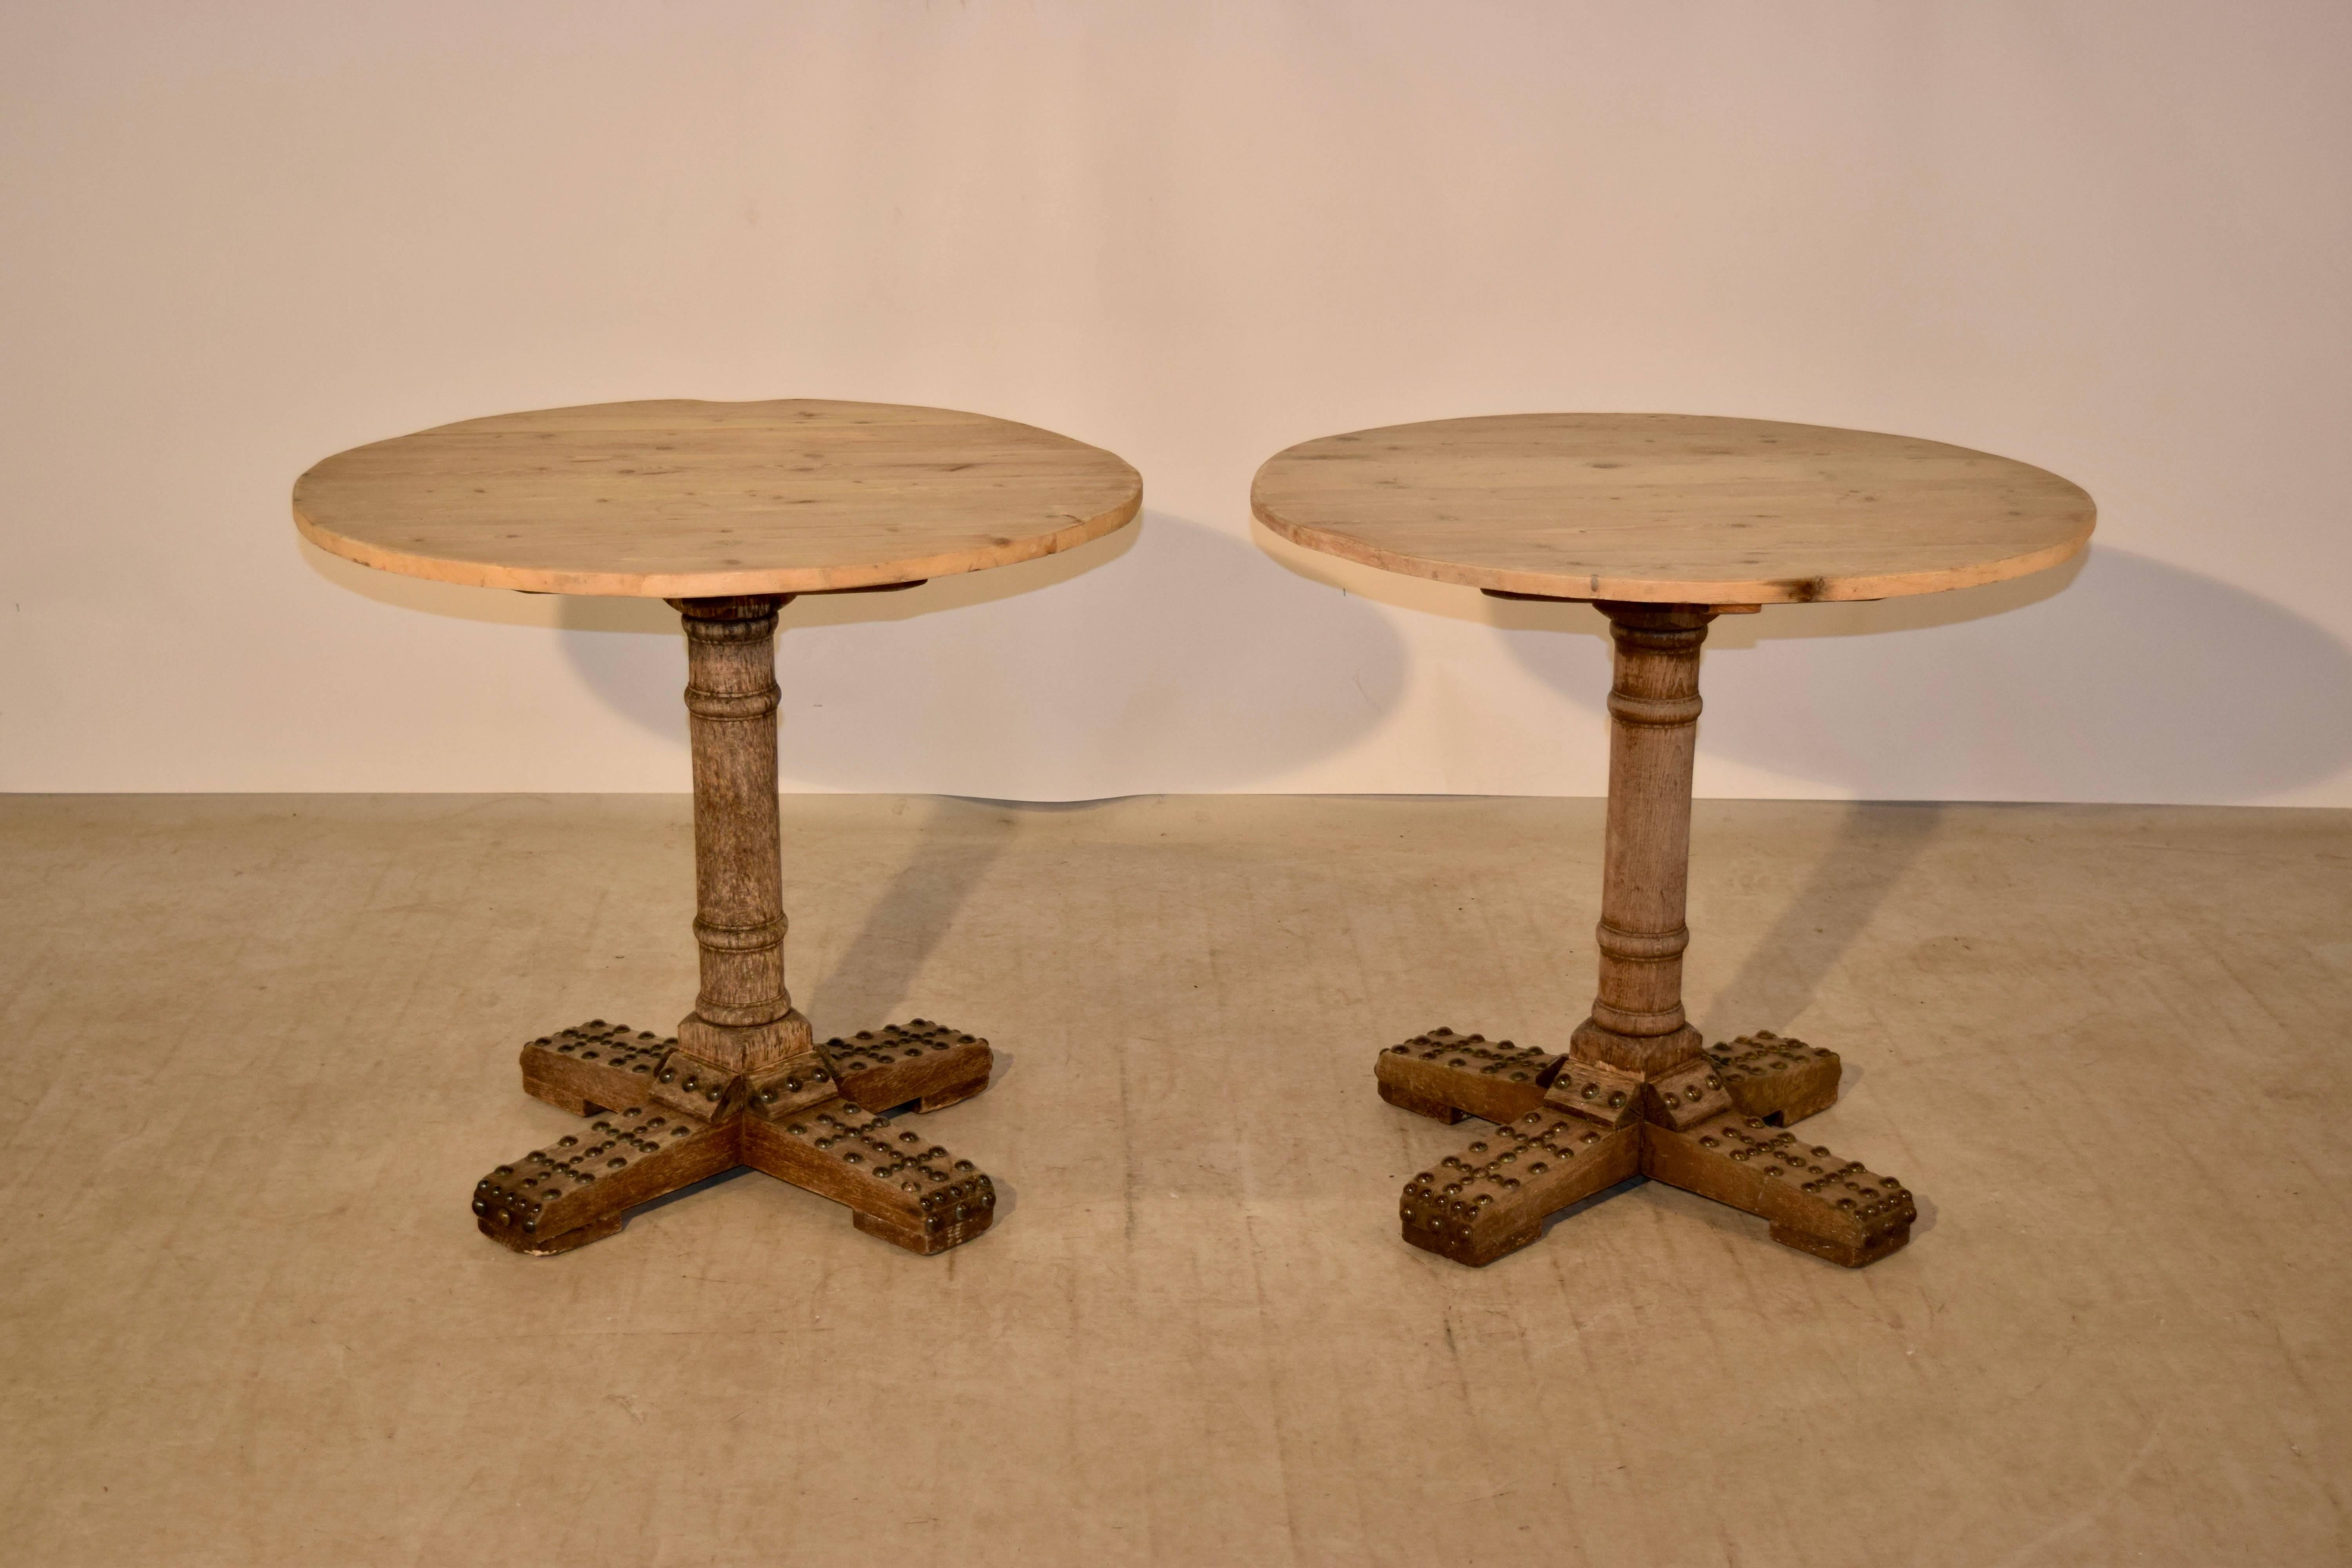 Rustic Late 19th Century Pair of French Cafe Tables